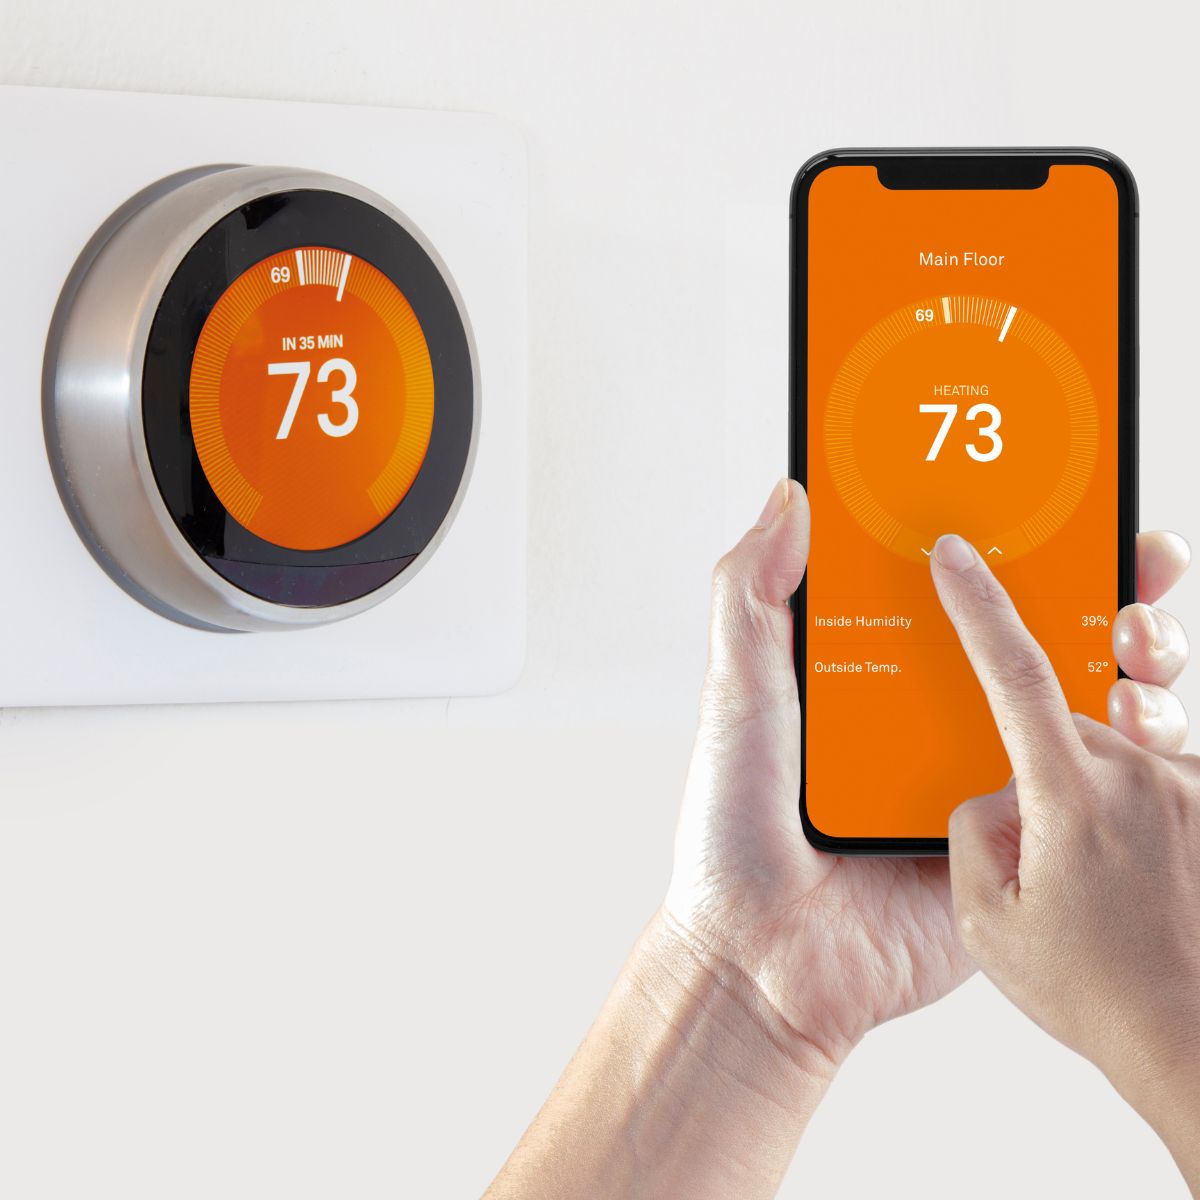 https://iaqcolorado.com/wp-content/uploads/2022/12/Can-HVAC-Zoning-be-Controlled-by-a-Smart-Thermostat.jpg